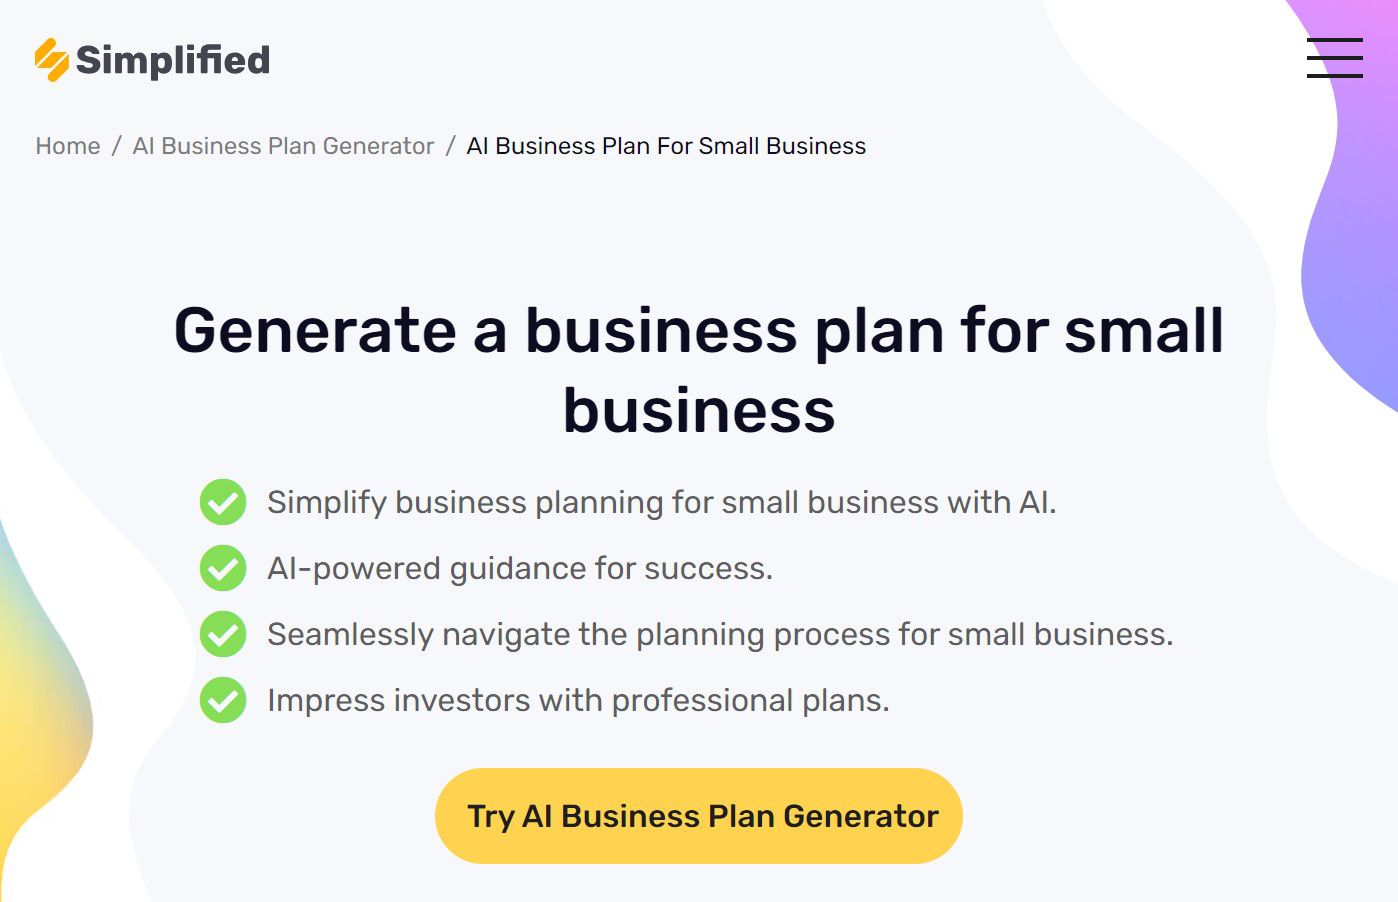 <p>Simplified is an AI business plan generator specifically tailored for small businesses. Users enter specific business information, including objectives, product offerings, target marketing, and financial details, and Simplified generates a personalized plan.</p><p>Besides pre-made templates, Simplified’s AI-powered writing tool is flexible, allowing you to create new content from scratch. Its advanced algorithms and natural language processing technology ensure you get outputs that match your needs.</p><p>Pros:</p><ul><li>Access over 90 free AI templates</li><li>Intuitive and user-friendly interface</li><li>Export generated business plans in multiple formats, including PDF and Word documents</li></ul><p>Cons:</p><ul><li>Generated AI business plan templates may be too general</li><li>Set up of the Simplified workspace can be complicated</li></ul><p>Pricing:</p><ul><li>Free plan with limited tier</li><li>AI Writer Pro starting at $18 per month (for 35,000 words and 1 seat)</li></ul>